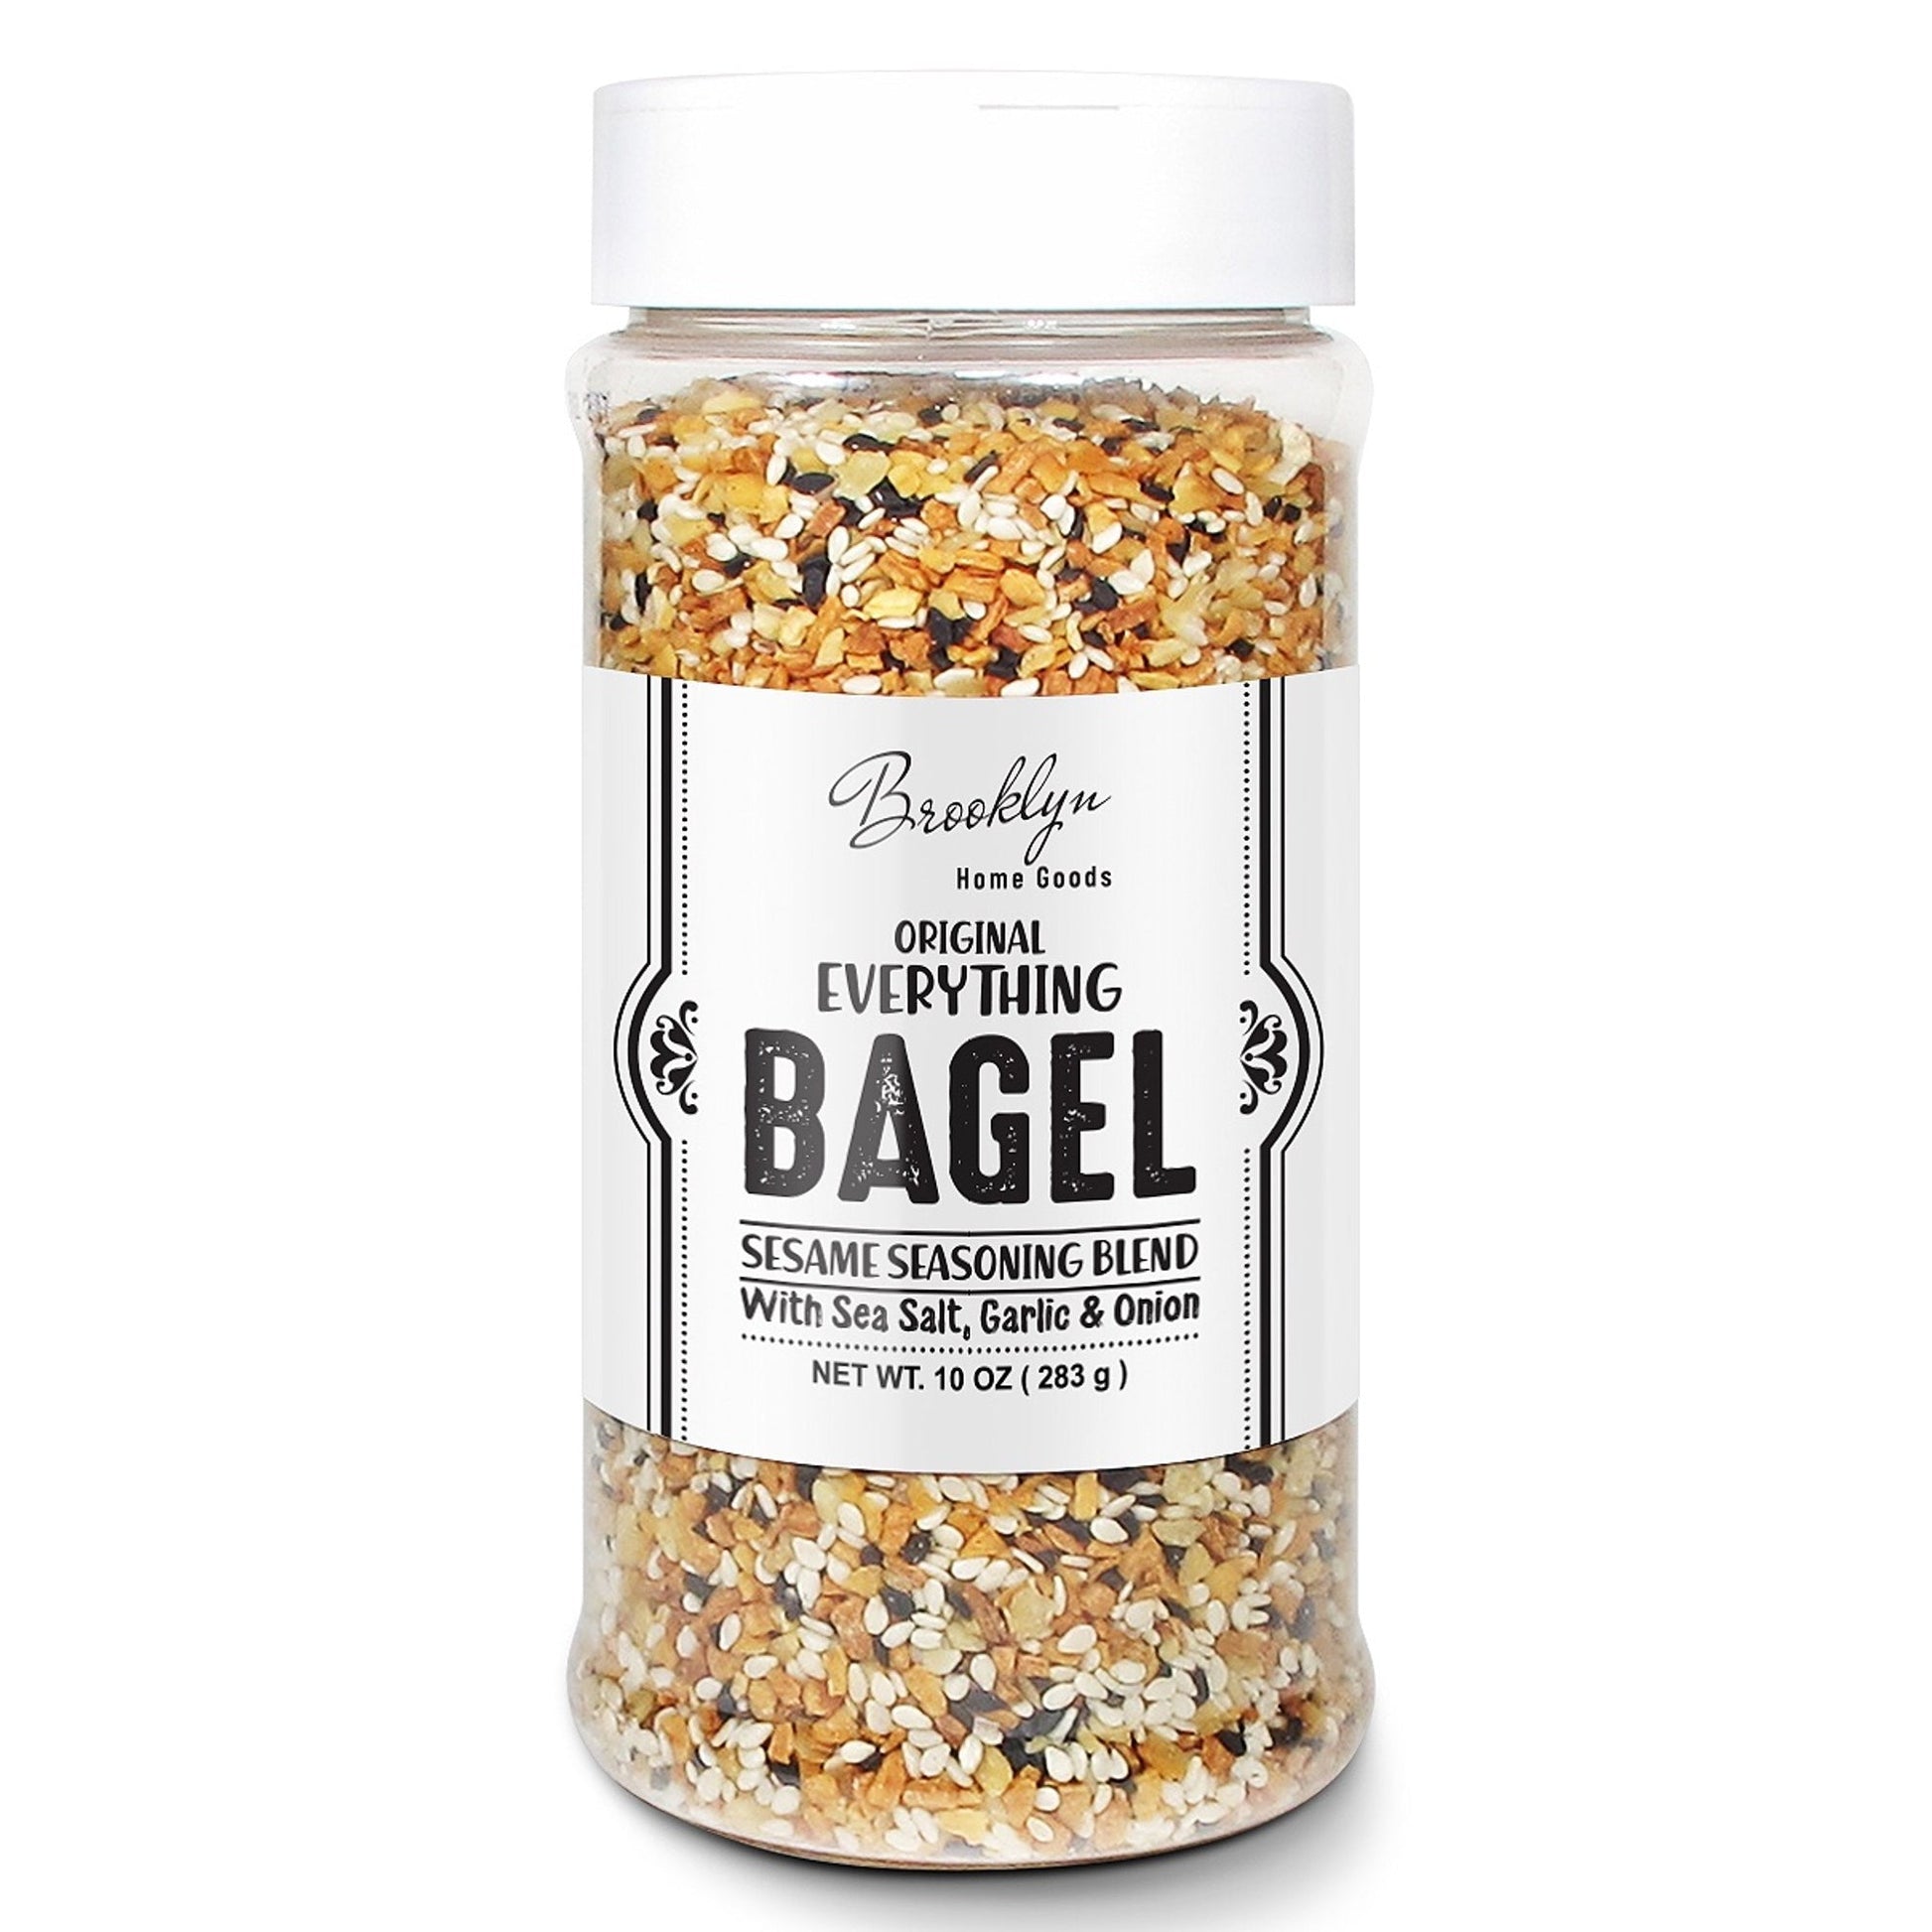 EASY Everything Bagel Seasoning - Dished by Kate